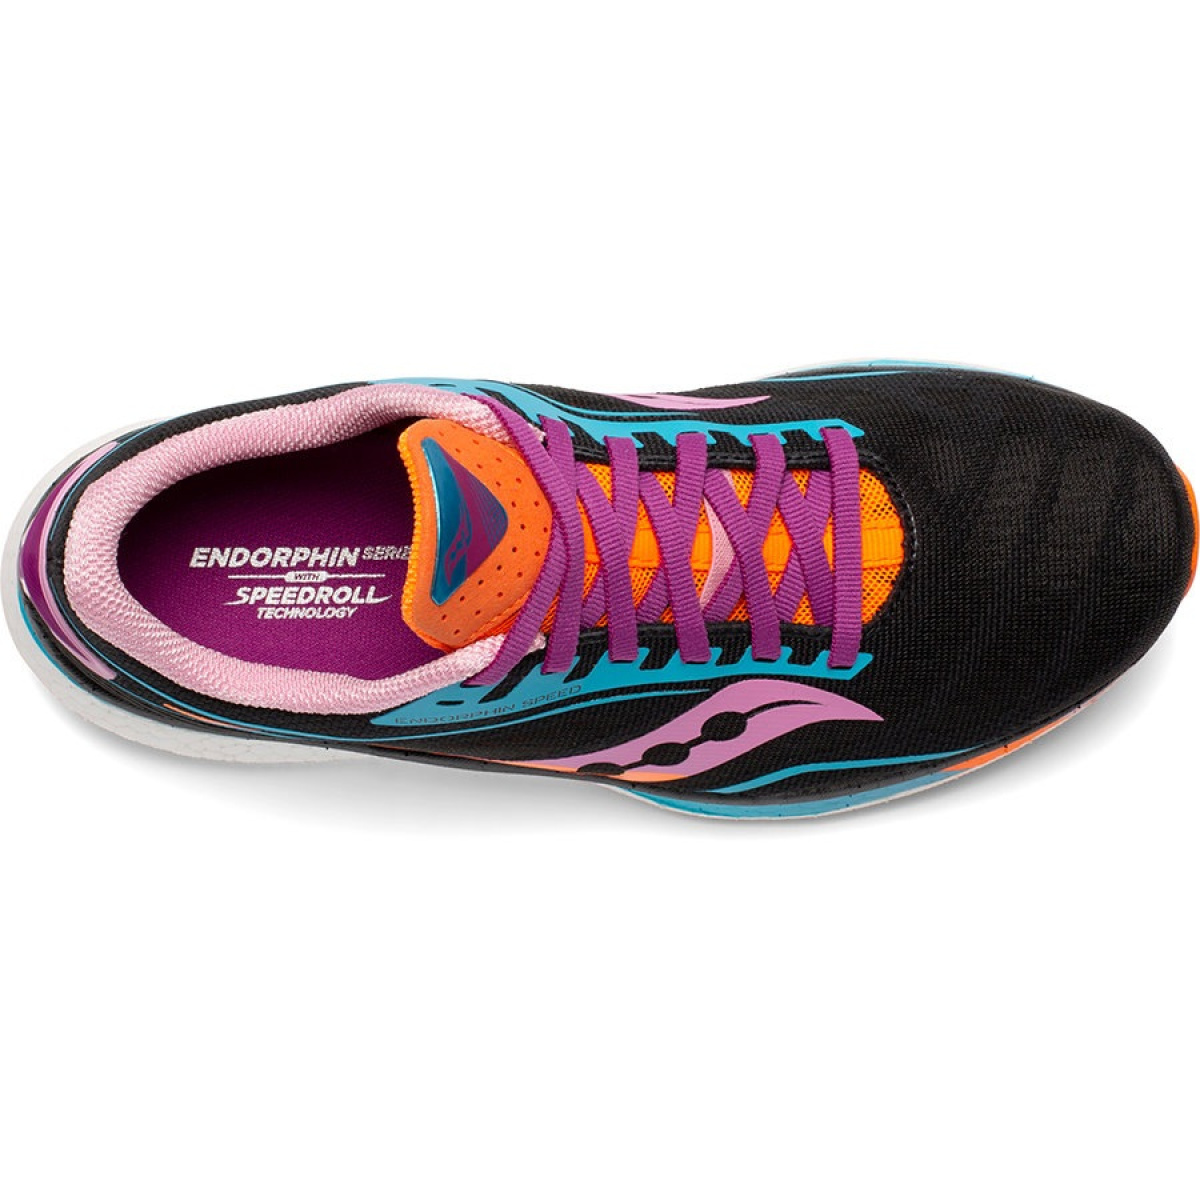 Saucony endorphin Speed road running shoe at Fast and Light CH 4